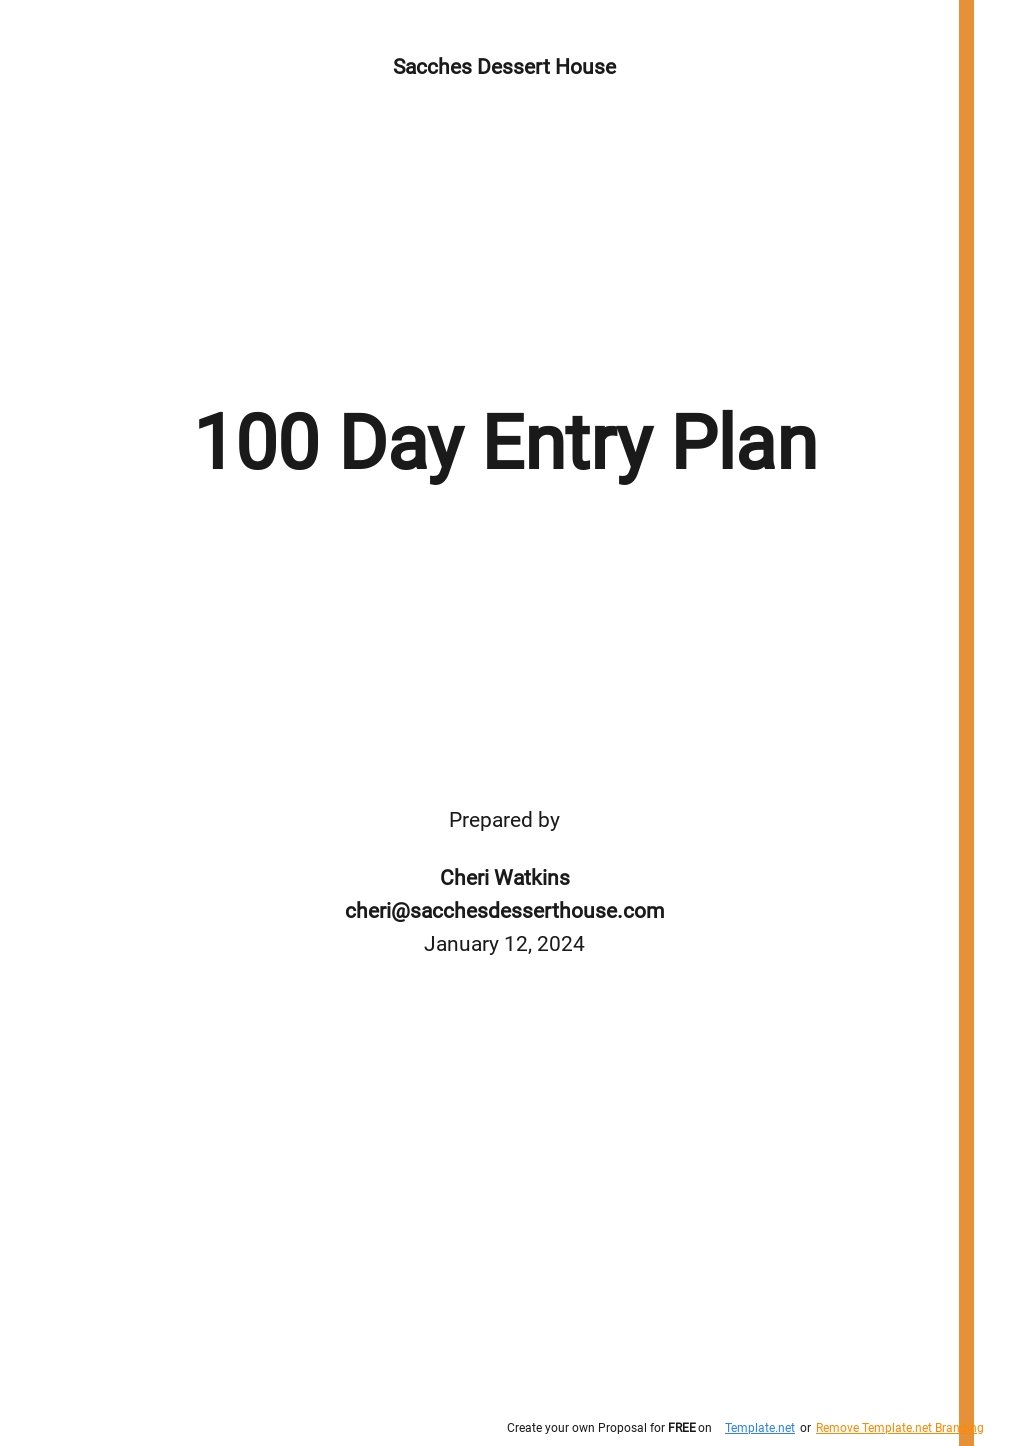 100 Day Entry Plan Template.jpe